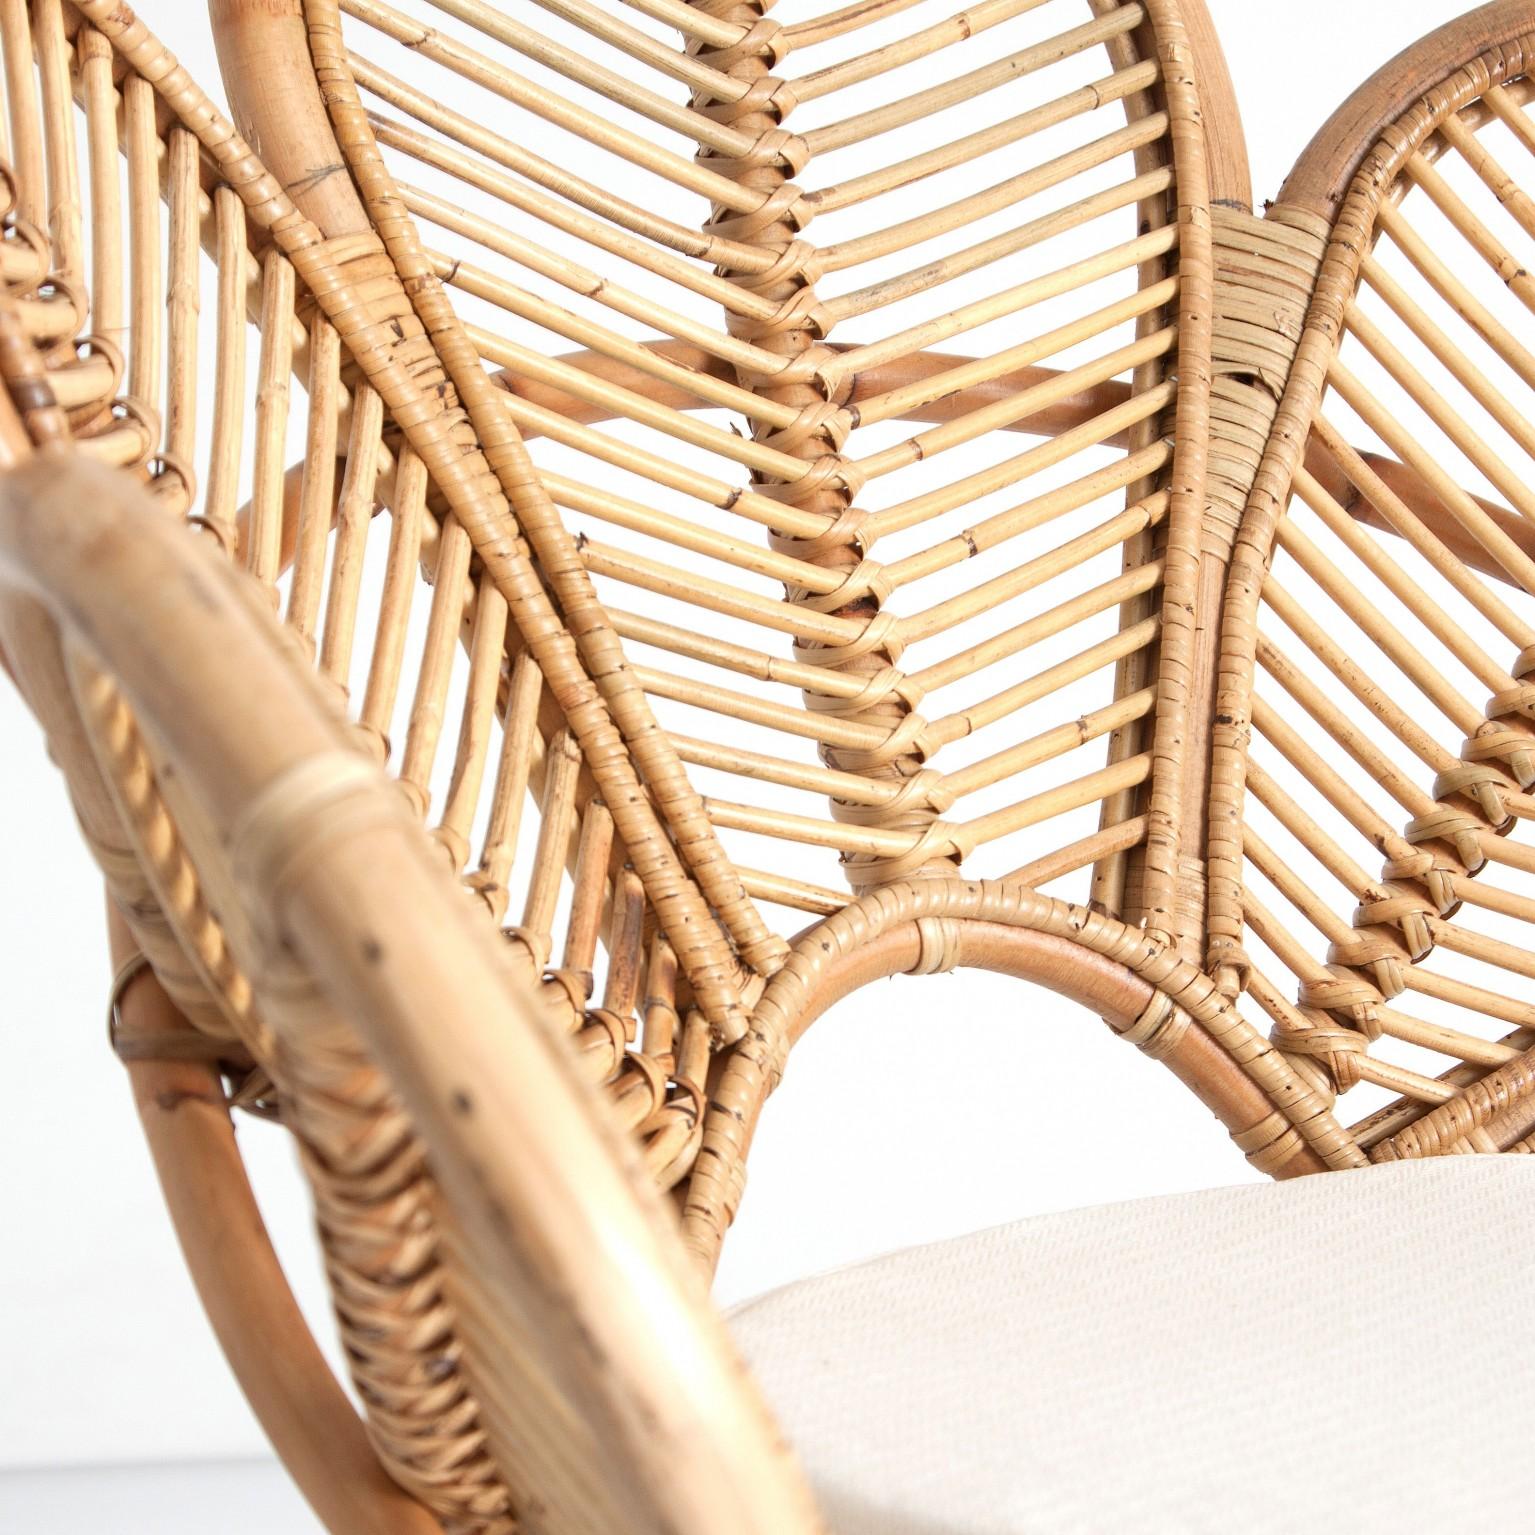 Gorgeous chair: rattan flower shaped seat, on wooden feet. Perfect on your terrace, in your veranda, around the swimming pool or the dining table. Poetic, elegant, aerial.